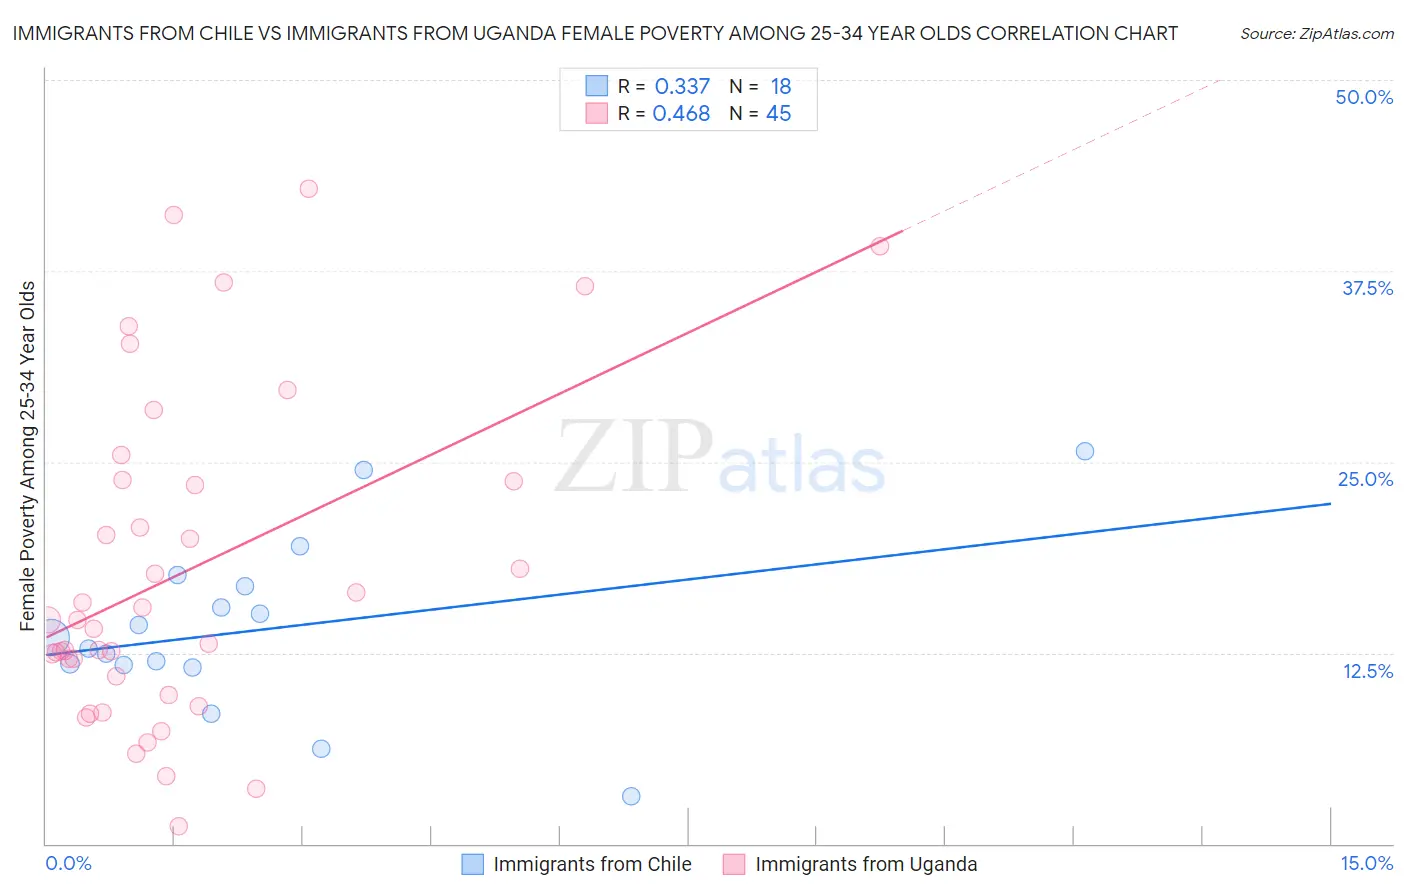 Immigrants from Chile vs Immigrants from Uganda Female Poverty Among 25-34 Year Olds